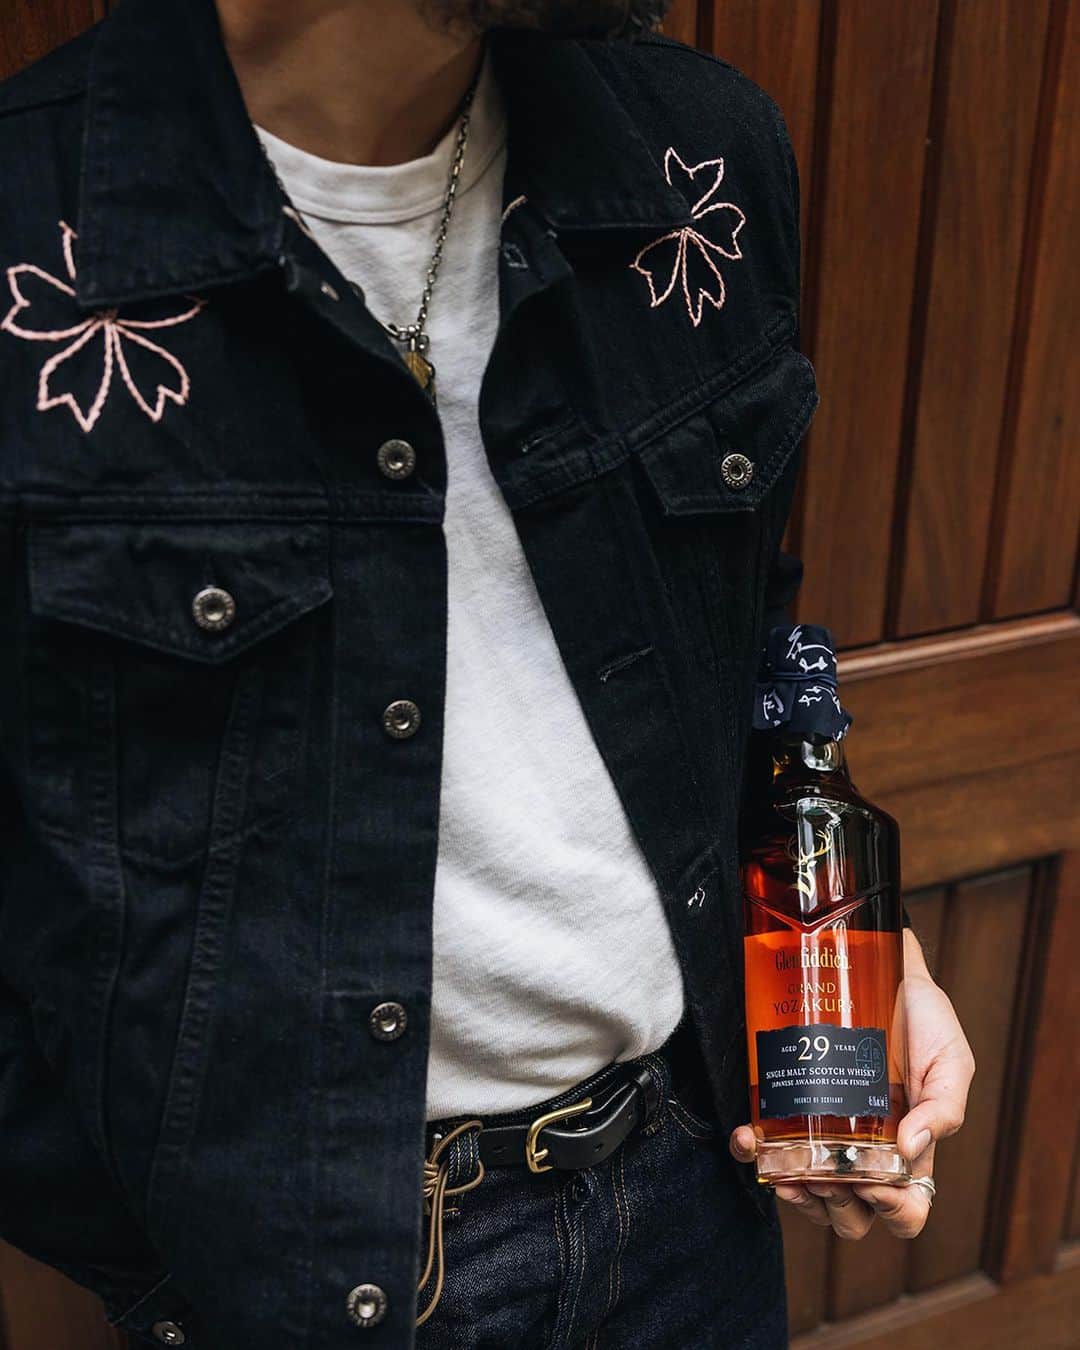 Glenfiddich USのインスタグラム：「🌸 Giveaway 🌸 In celebration of the release of @GlenfiddichUS’ Grand Yozakura 29 Year-Old Single Malt Scotch Whisky, @3sixteen and Glenfiddich have partnered together to create a highly-limited run of hand-stitched sakura-inspired black denim jackets. Each of the collab jackets is made in the USA and embroidered by Jaime Wong of @raggedythreads.    To enter for a chance to win one of your own:  -Follow @GlenfiddichUS & @3sixteen on Instagram -Share this post to your Instagram story  -Comment below with your jacket size   Lucky winners will receive a DM from @3sixteen with more details.  NOTE: MUST LIVE IN THE UNITED STATES & BE 21 YEARS OR OLDER ON 5/9/2023 TO ENTER. DOES NOT INCLUDE BOTTLE OF WHISKY. FULL SWEEPSTAKES TERMS AND CONDITIONS IN @3SIXTEEN’S BIO.」